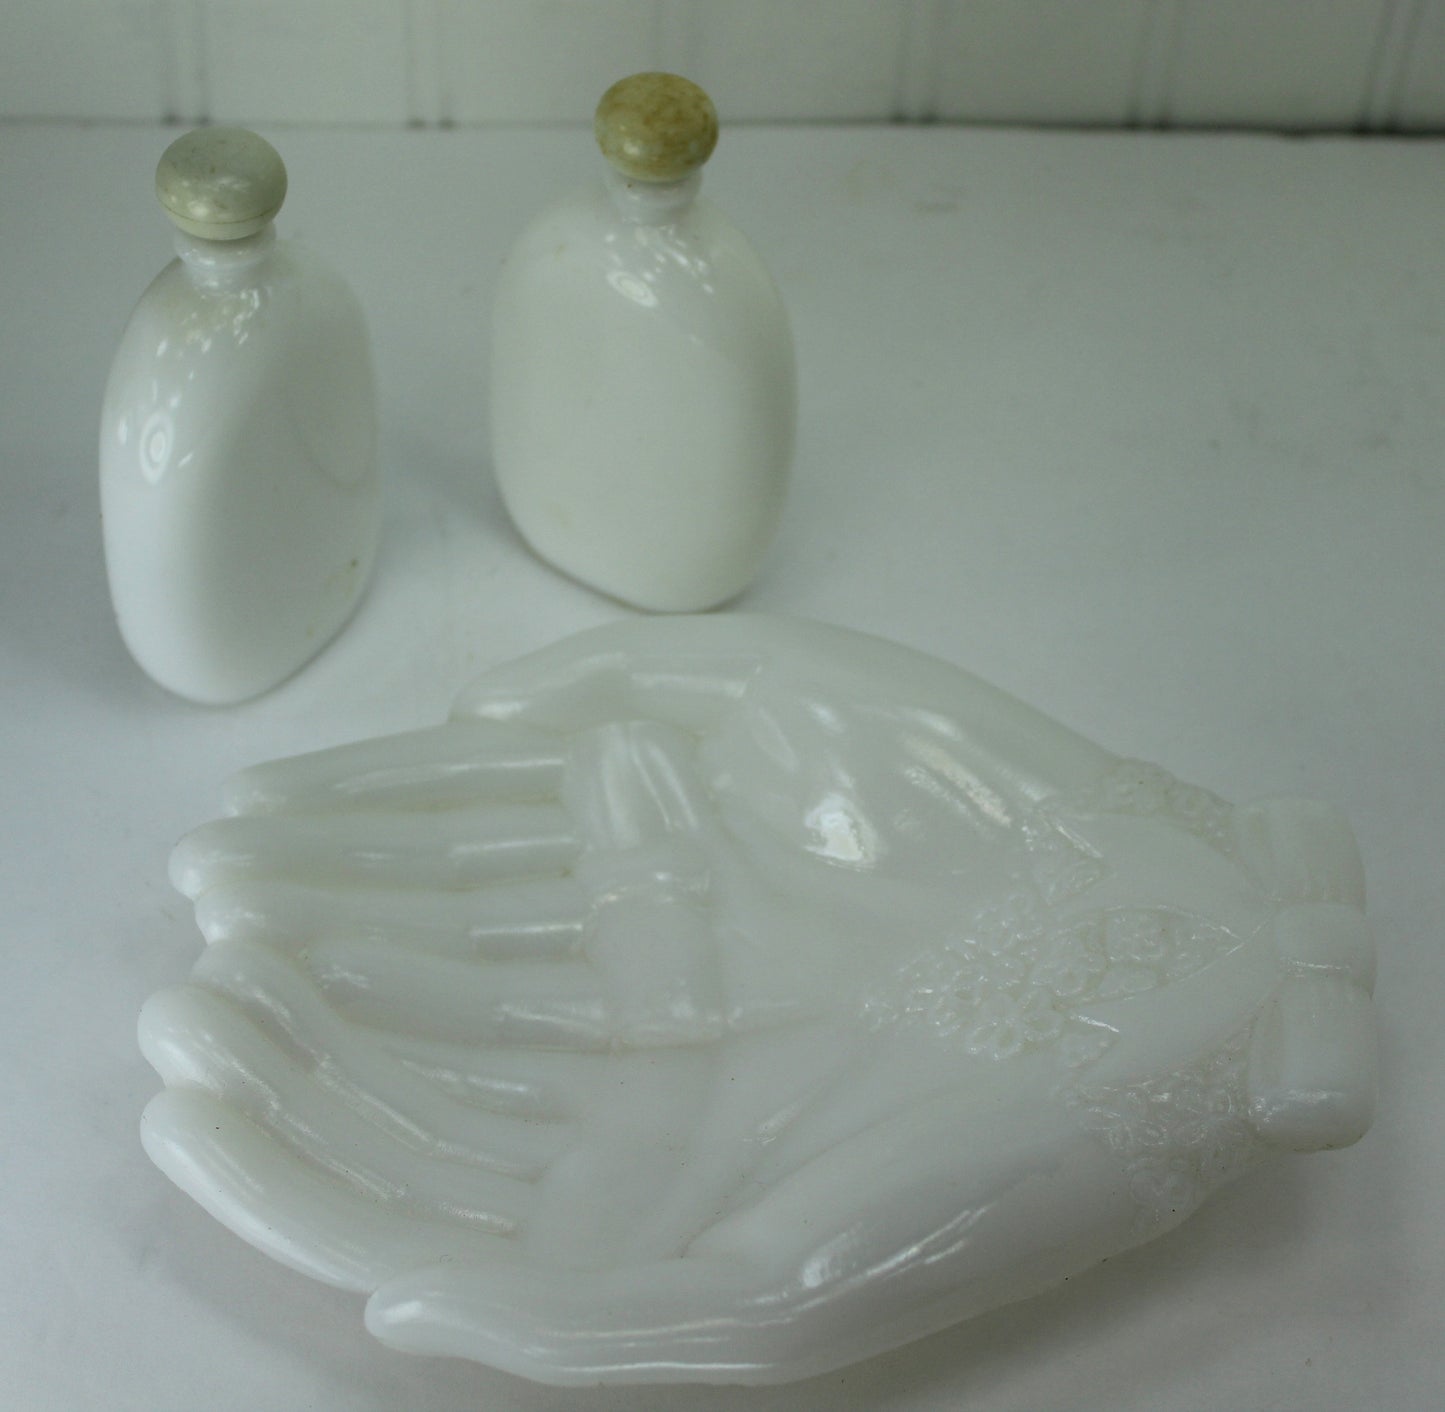 Avon Vintage Vanity Collectibles Milk Glass Hand 2 Painted Violet Perfume Bottles nicer than photo of hand